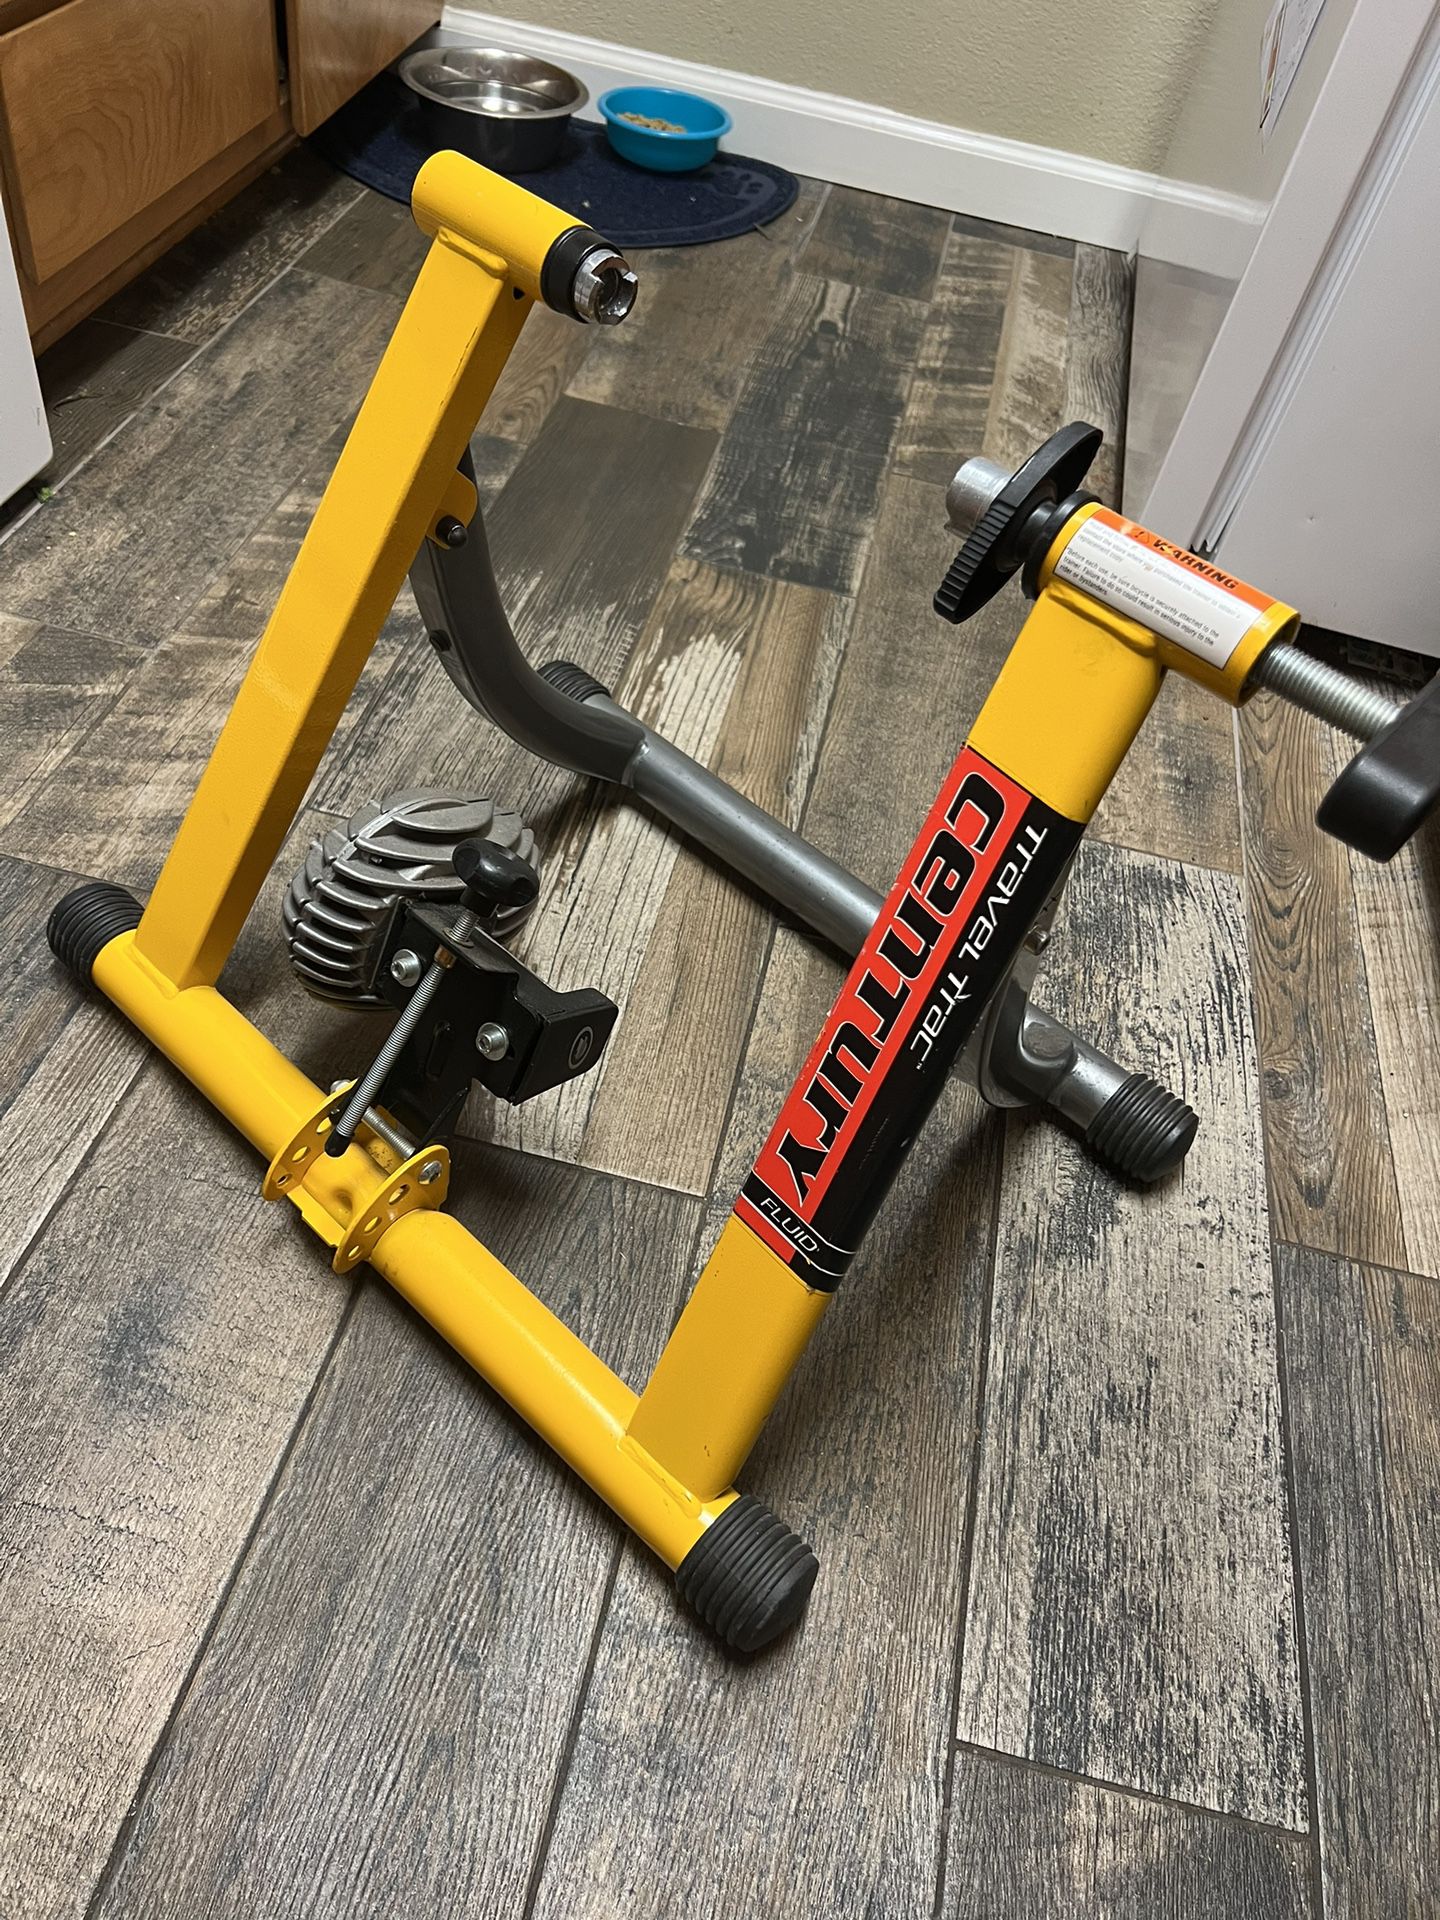 Nice Fluid Indoor Bike Trainer Ideal For Summer When It Gets Too Hot To Ride Out